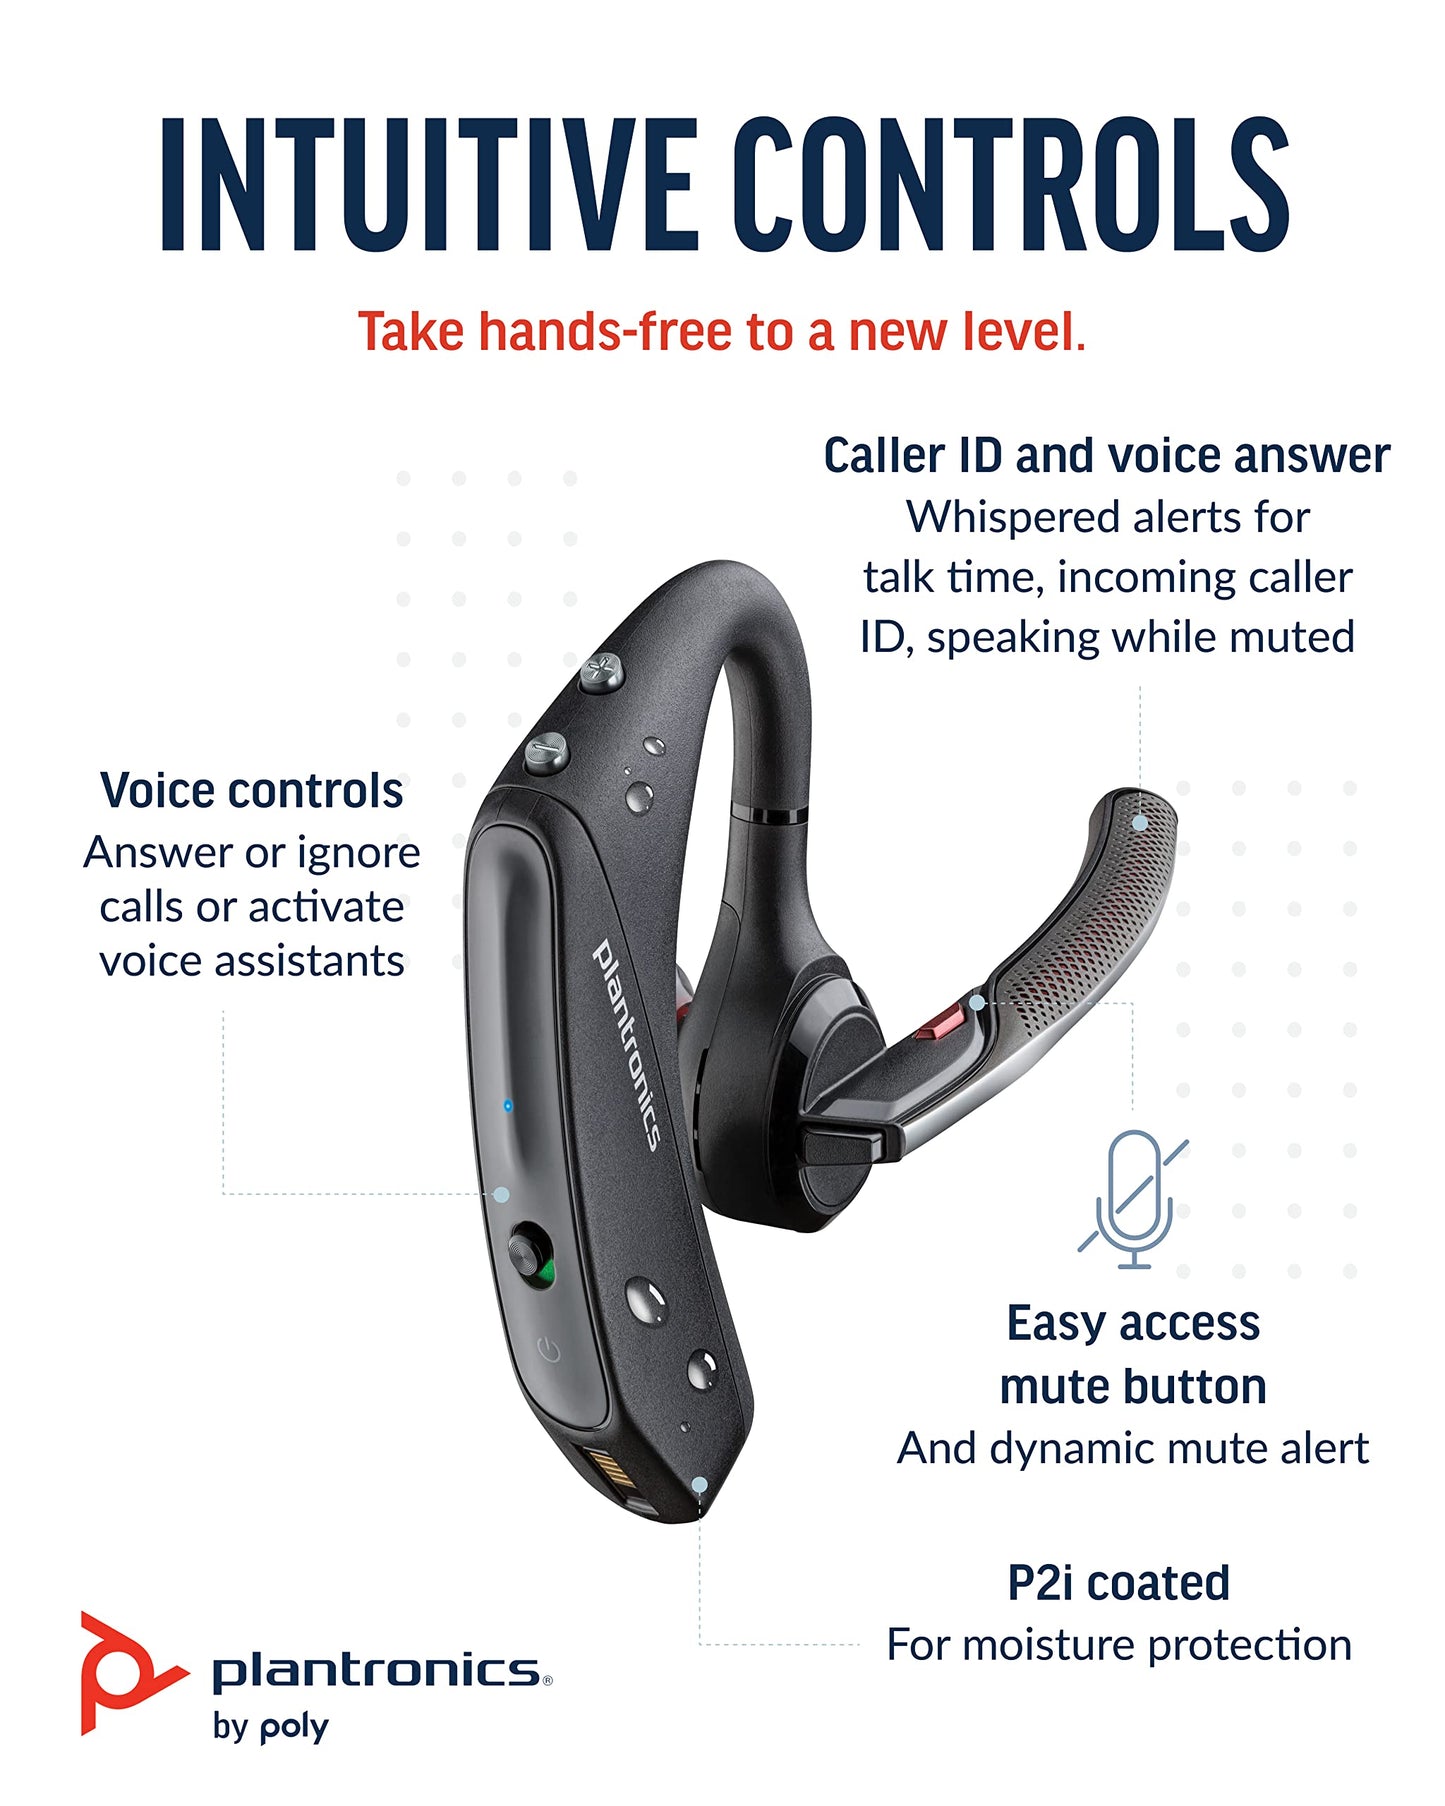 Poly Voyager 5200 UC Wireless Headset & Charging Case - Single-Ear Bluetooth Headset w/Noise-Canceling Mic - Connect to Mobile/PC via Bluetooth -Works w/Microsoft Teams, Zoom & More, Plantronics